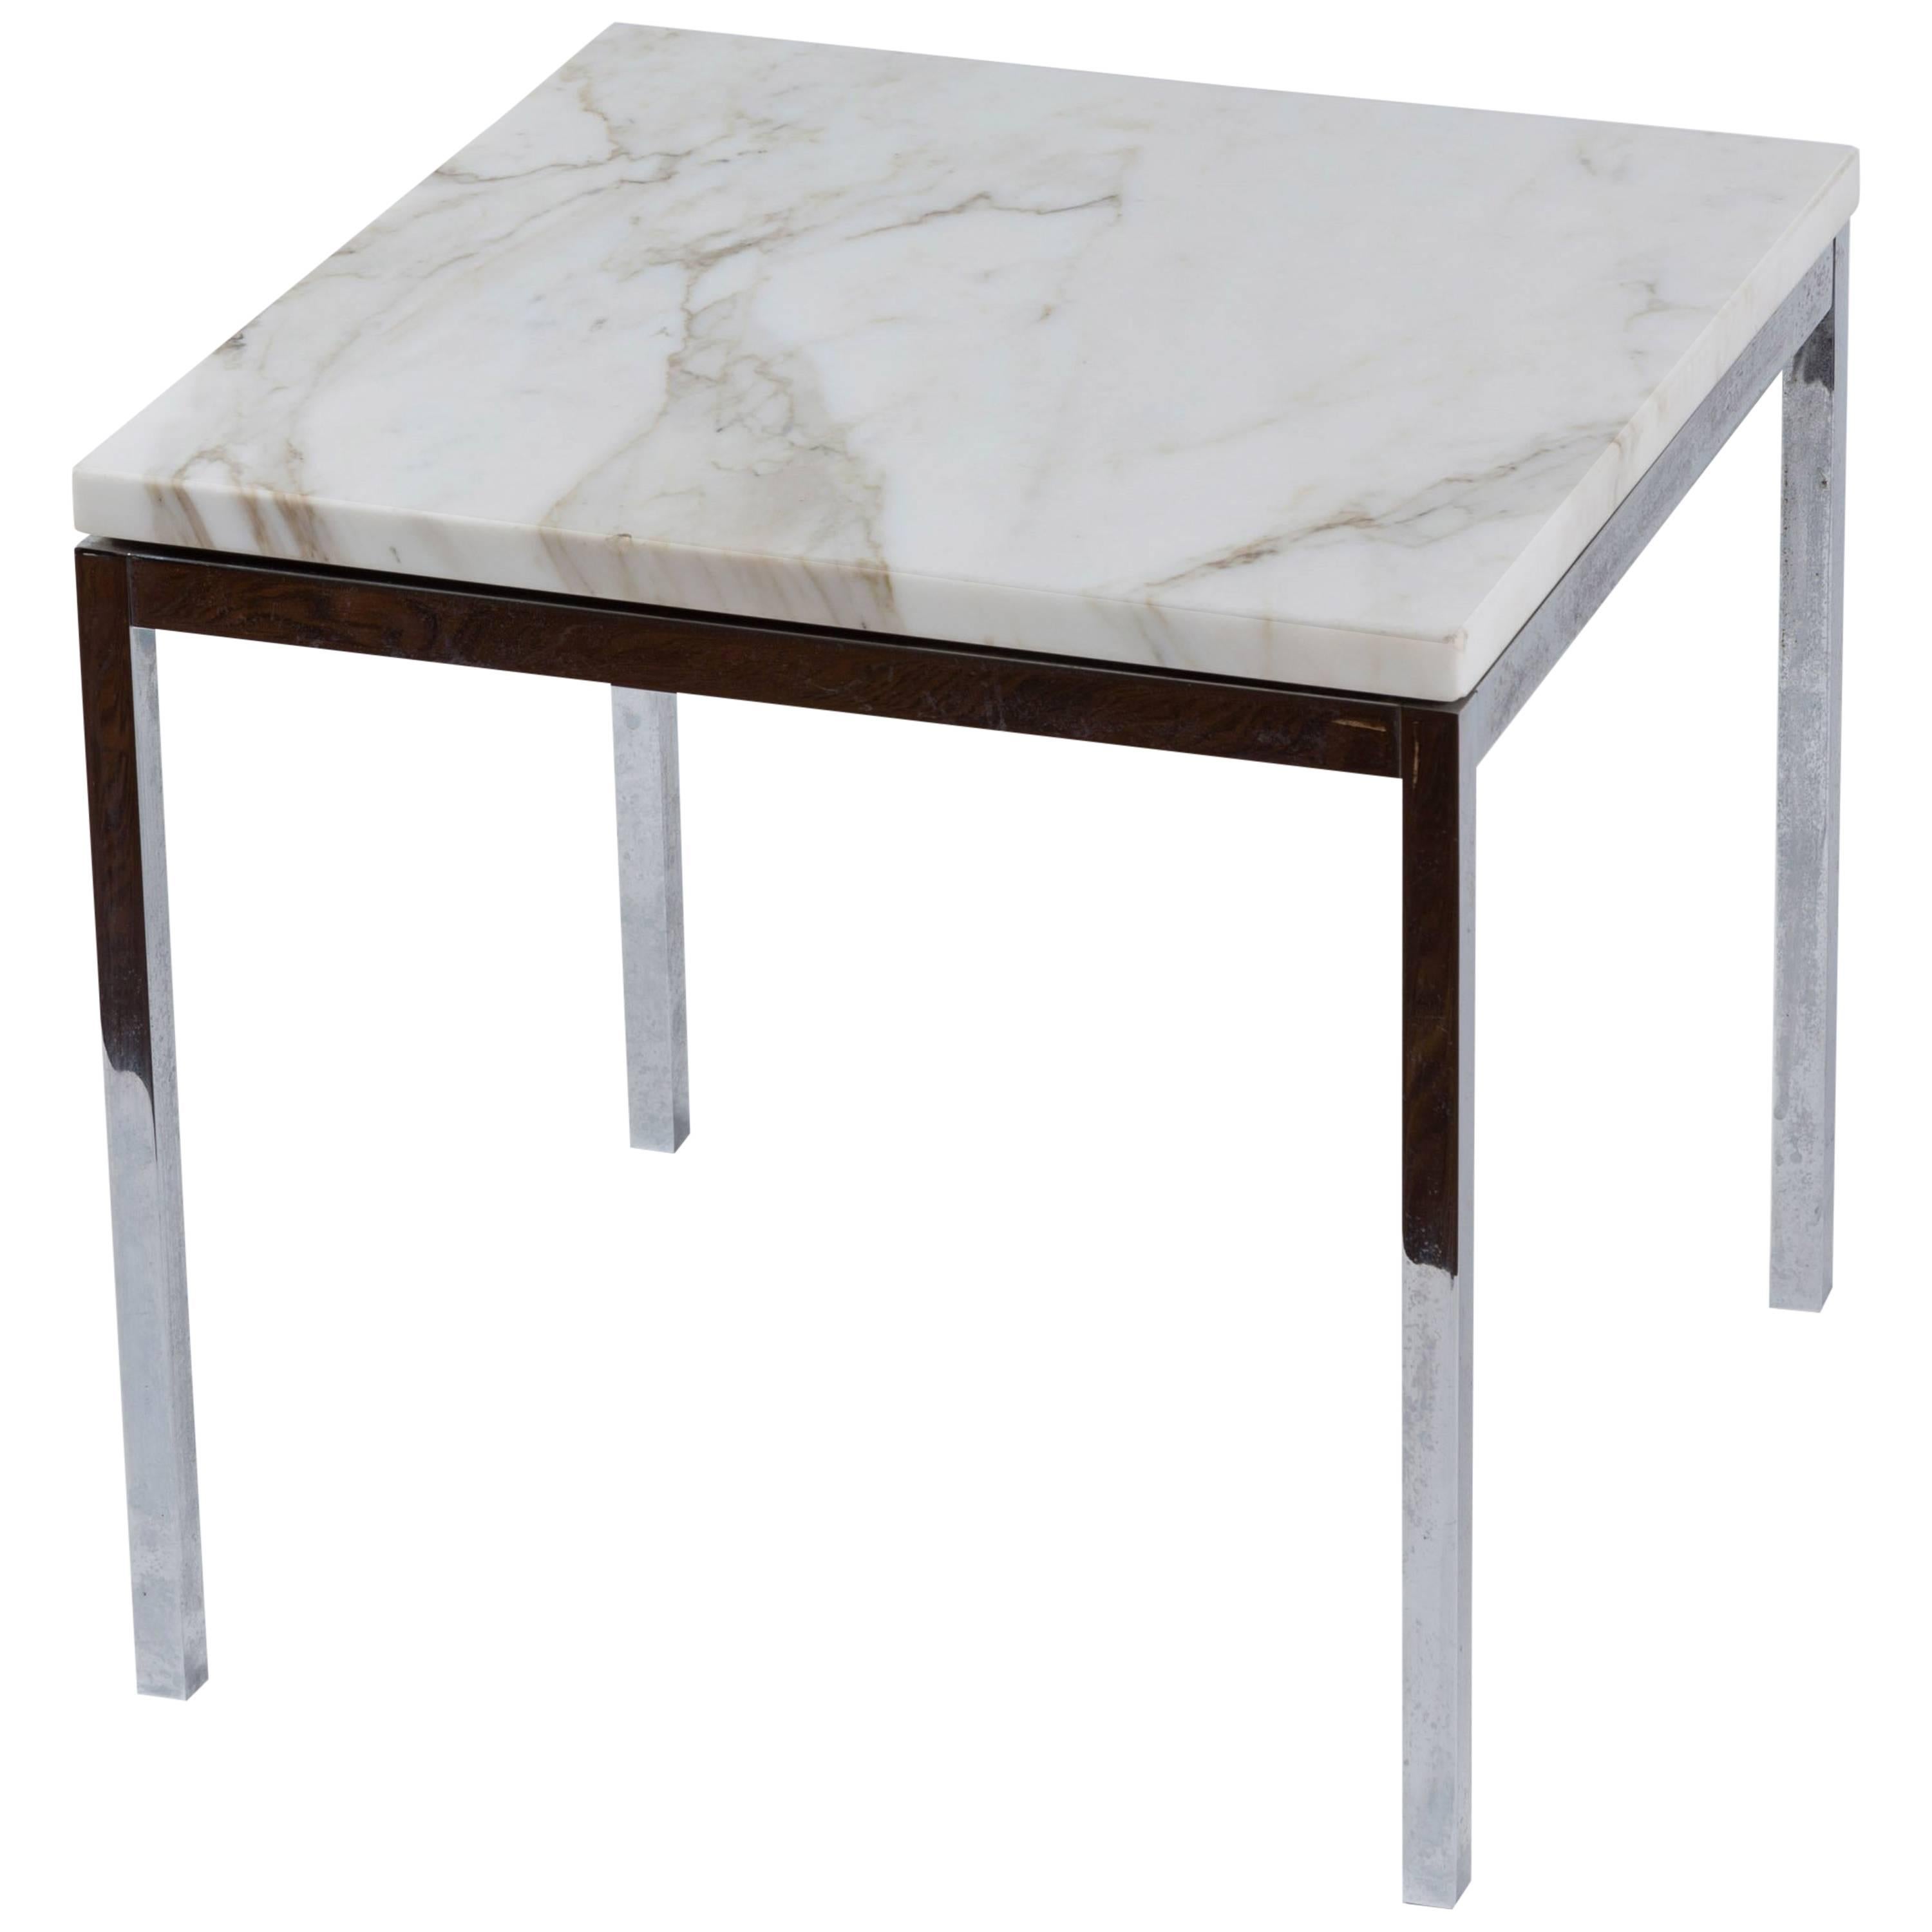 American Knoll-Style Chrome and Marble End Table, circa 1950